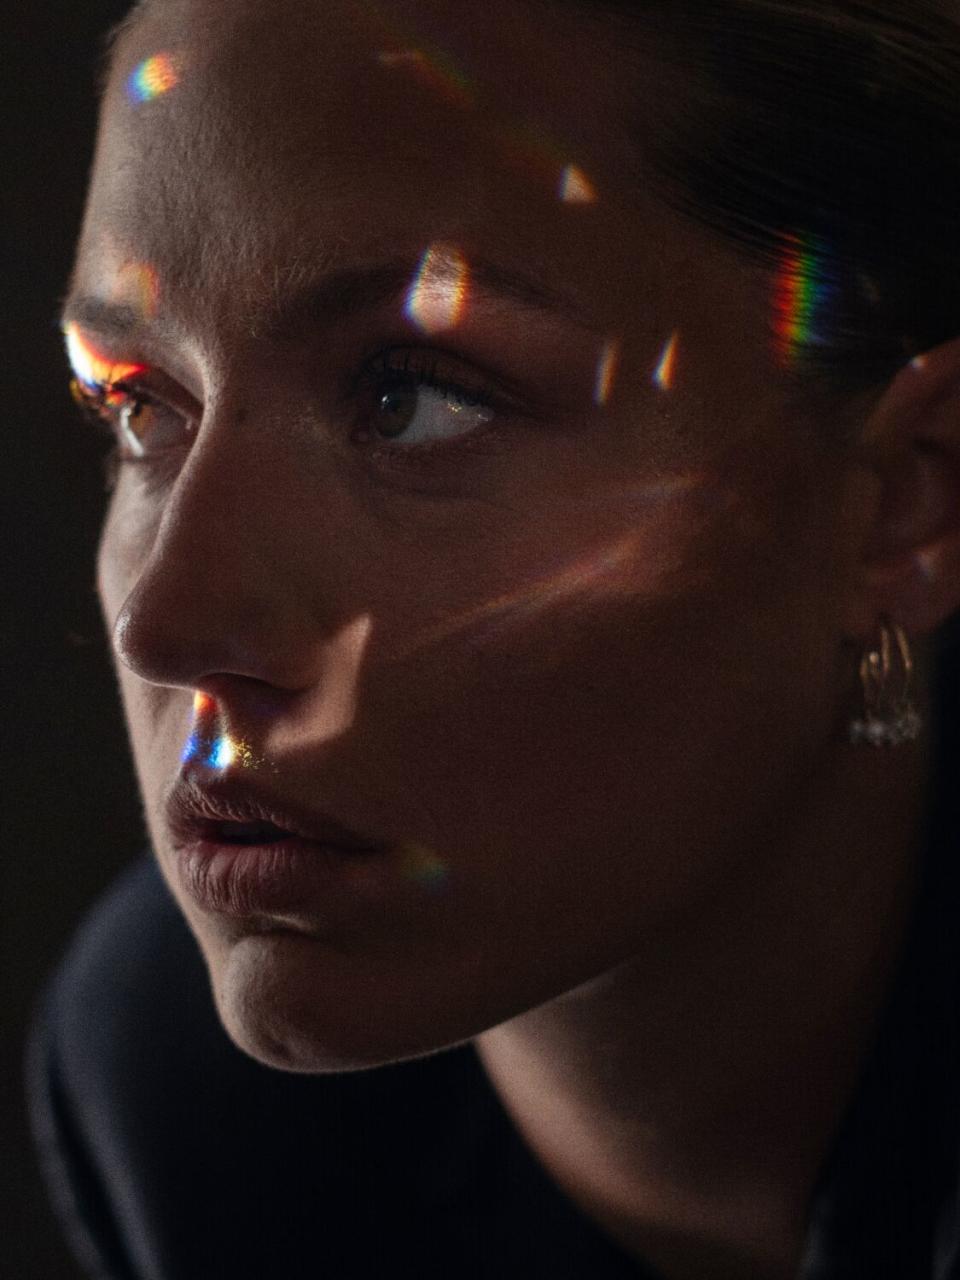 A woman has light reflected off her face